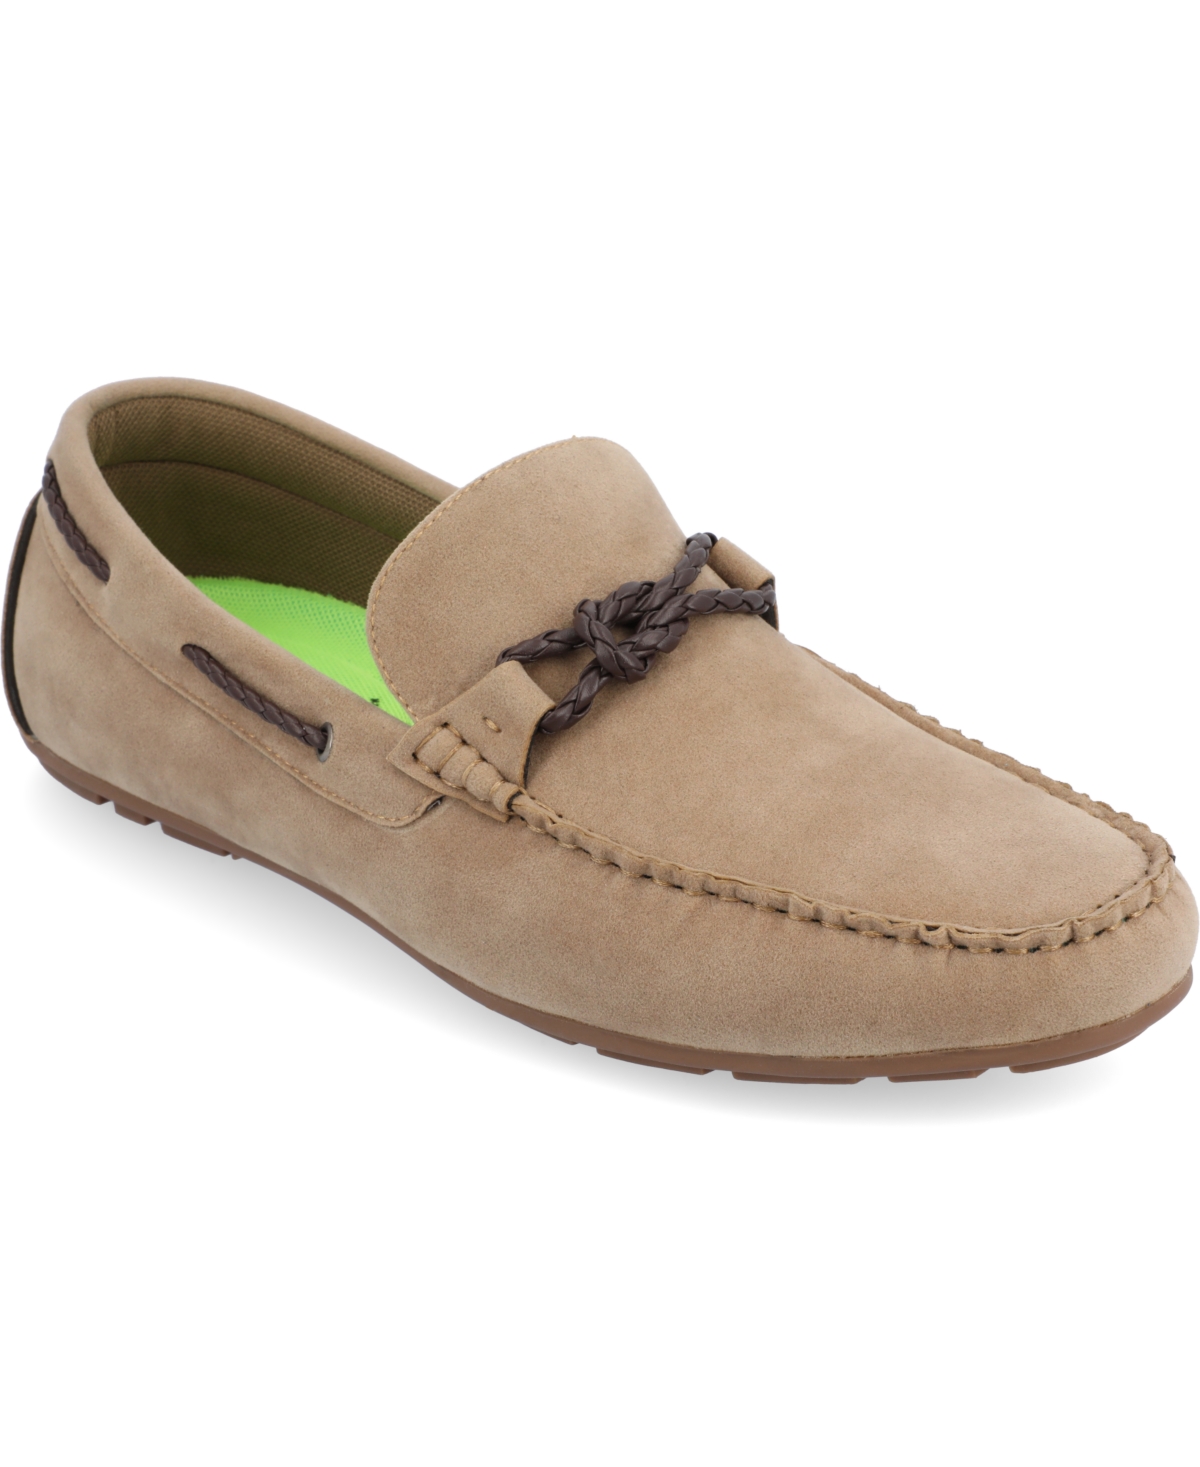 Vance Co. Tyrell Driving Loafer In Taupe